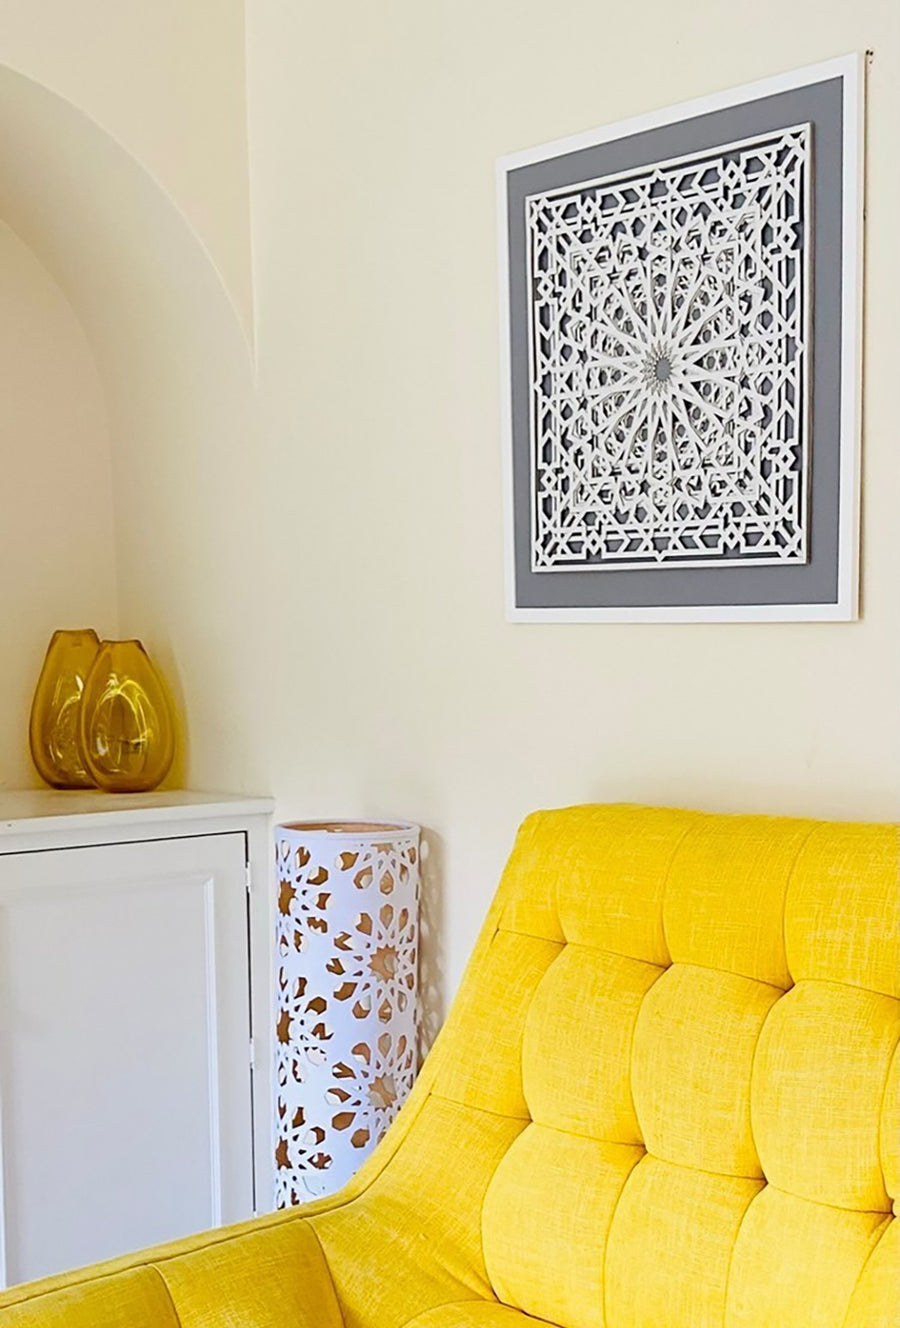 White, Islamic pattern, laser cut artwork on wall in a living room, surrounded by a yellow chair, yellow vases.